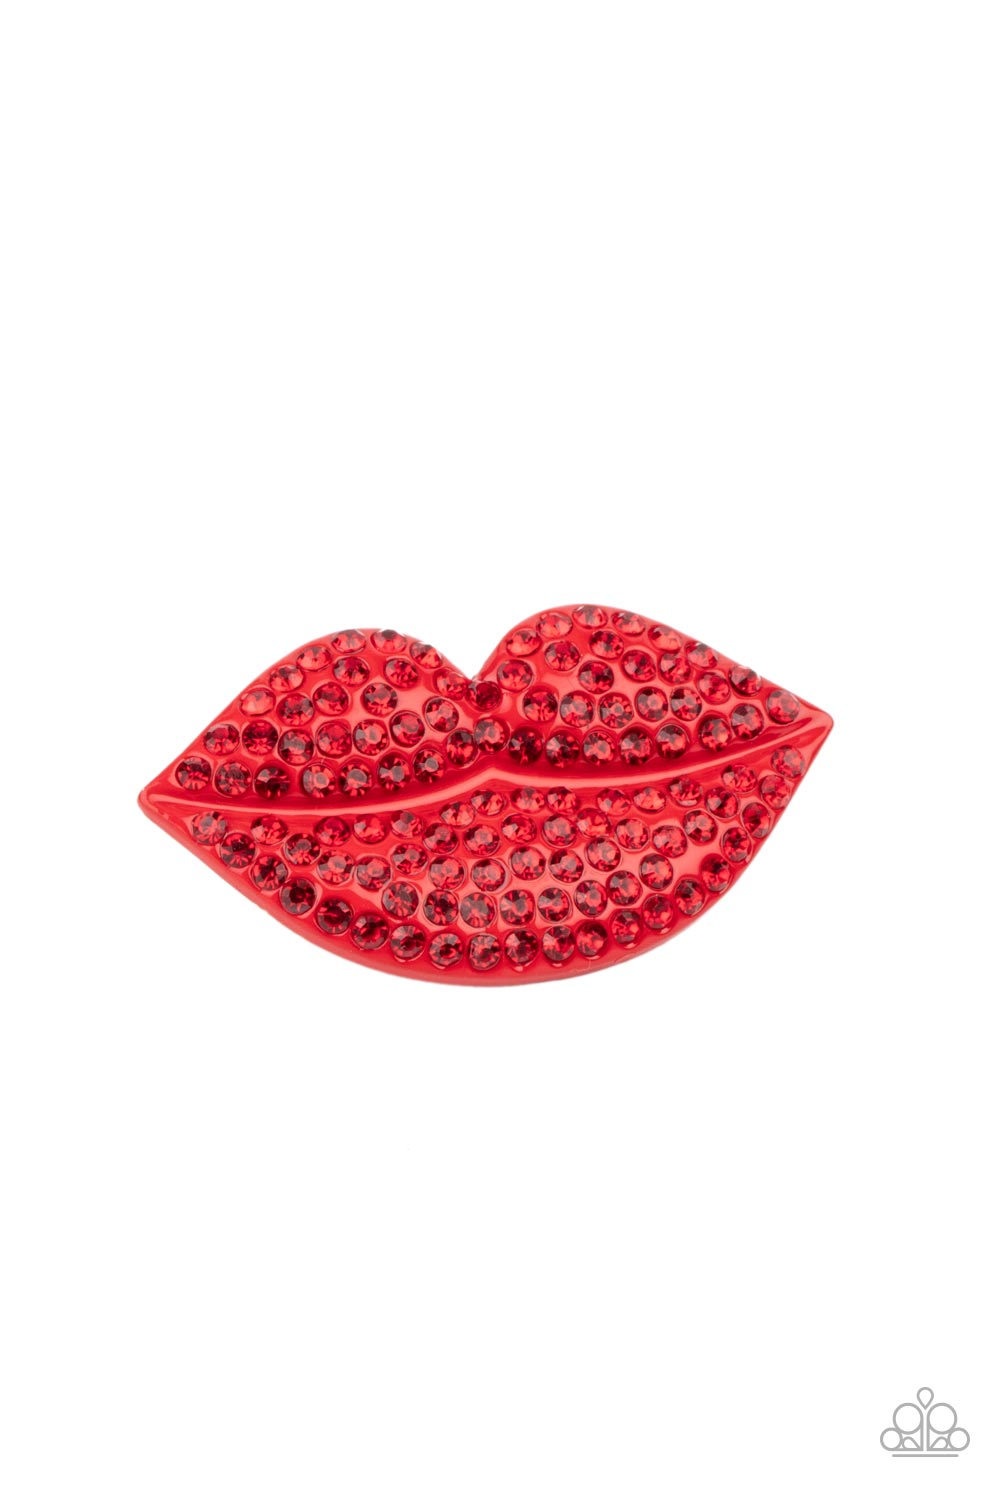 HAIR Kiss - Red - VJ Bedazzled Jewelry